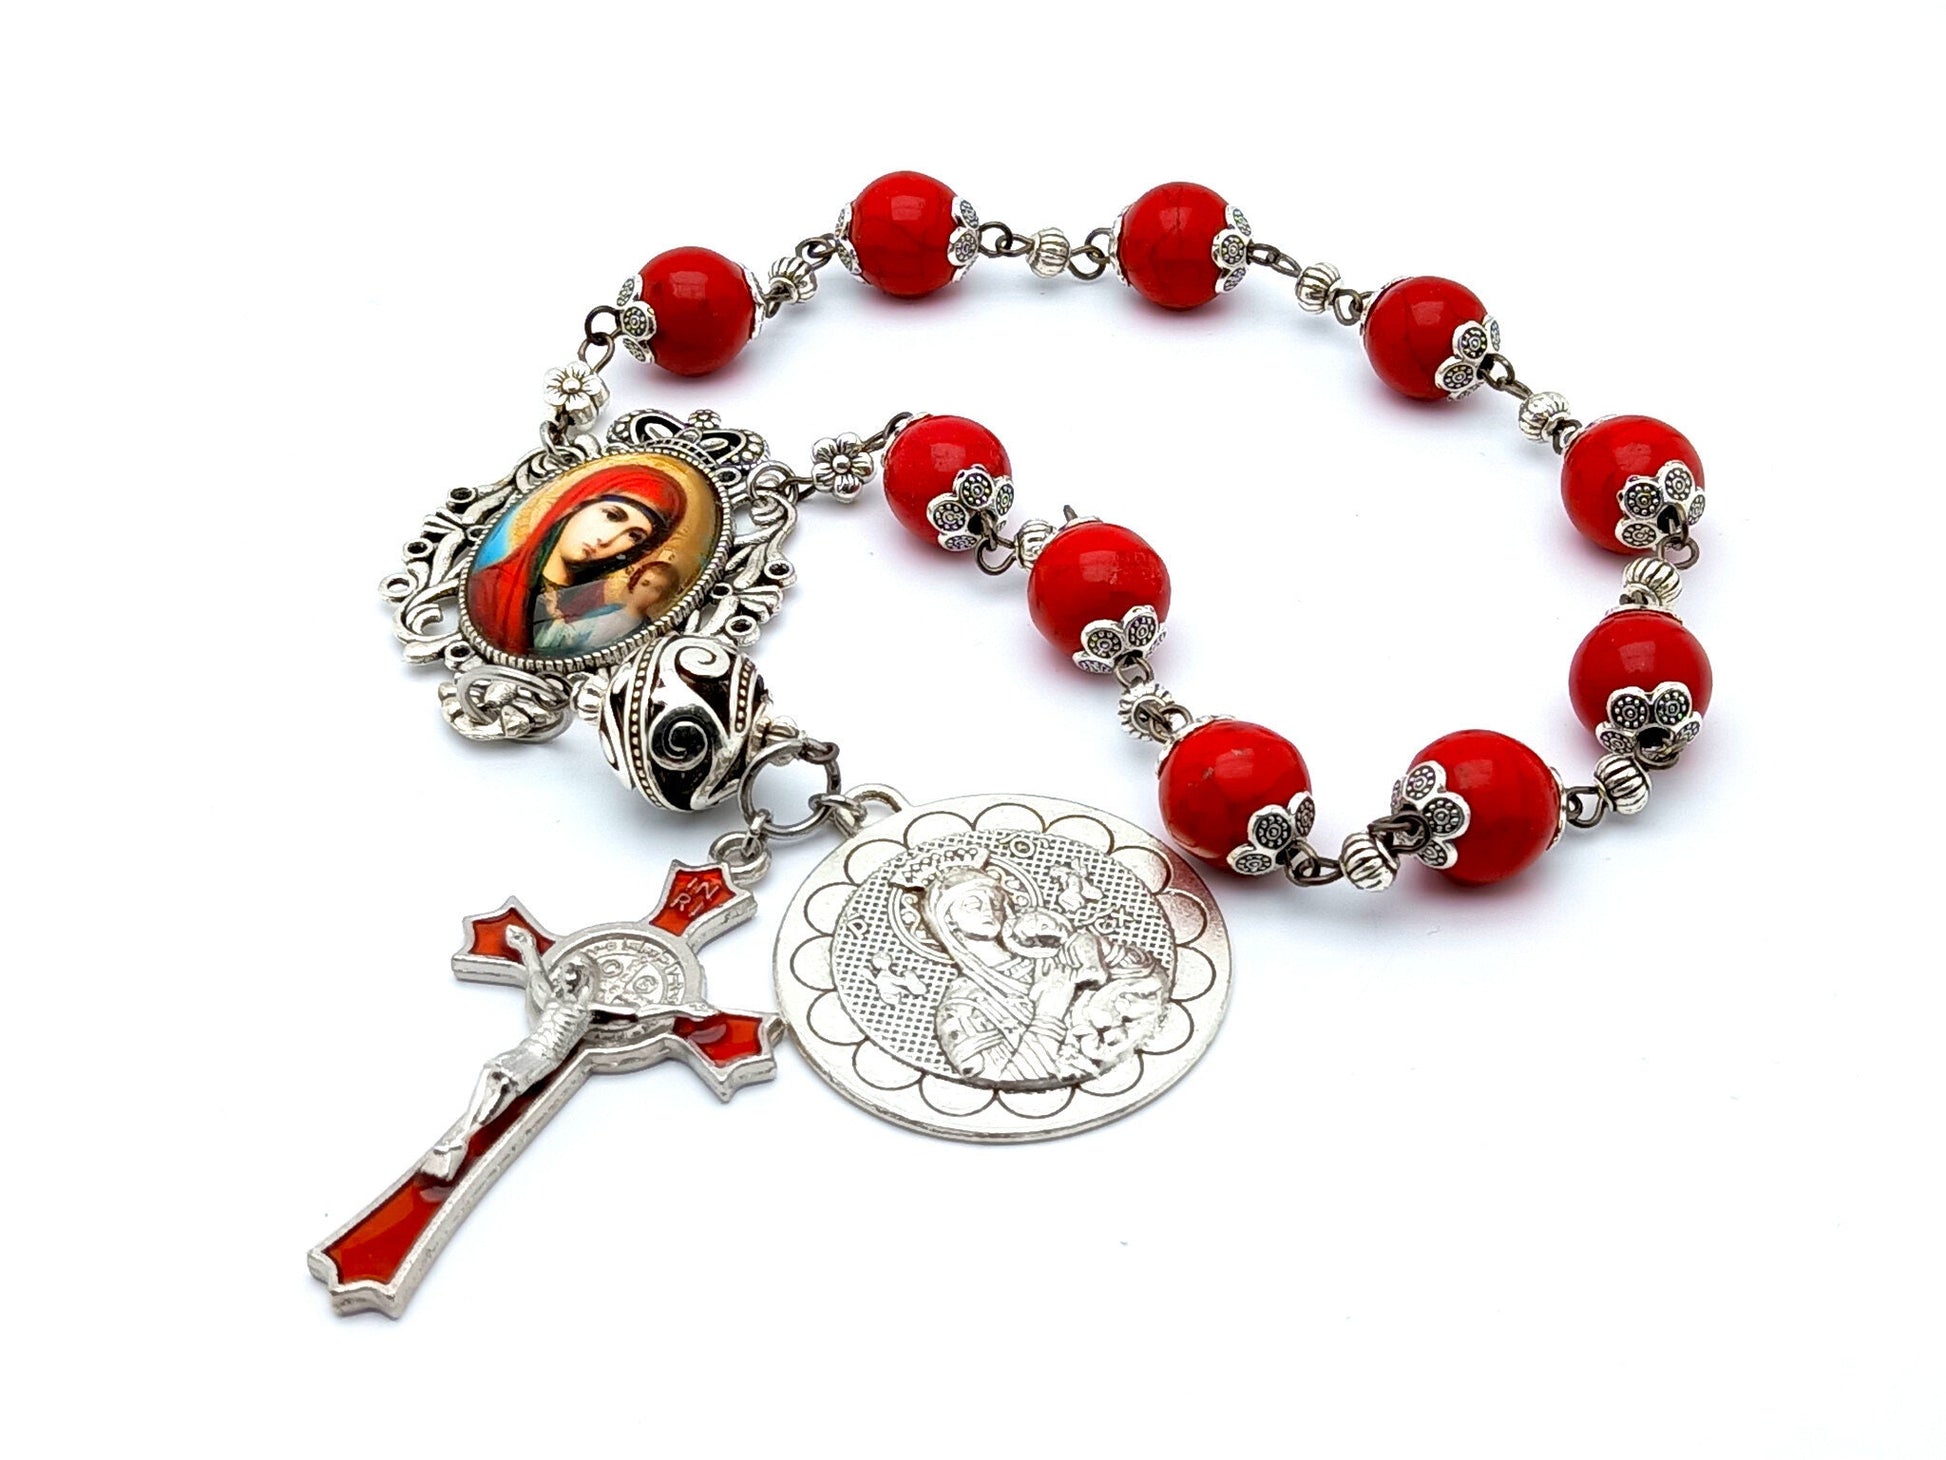 Our Lady of Perpetual Succor unique rosary beads single decade rosary with red gemstone beads, red enamel crucifix and picture centre medal.